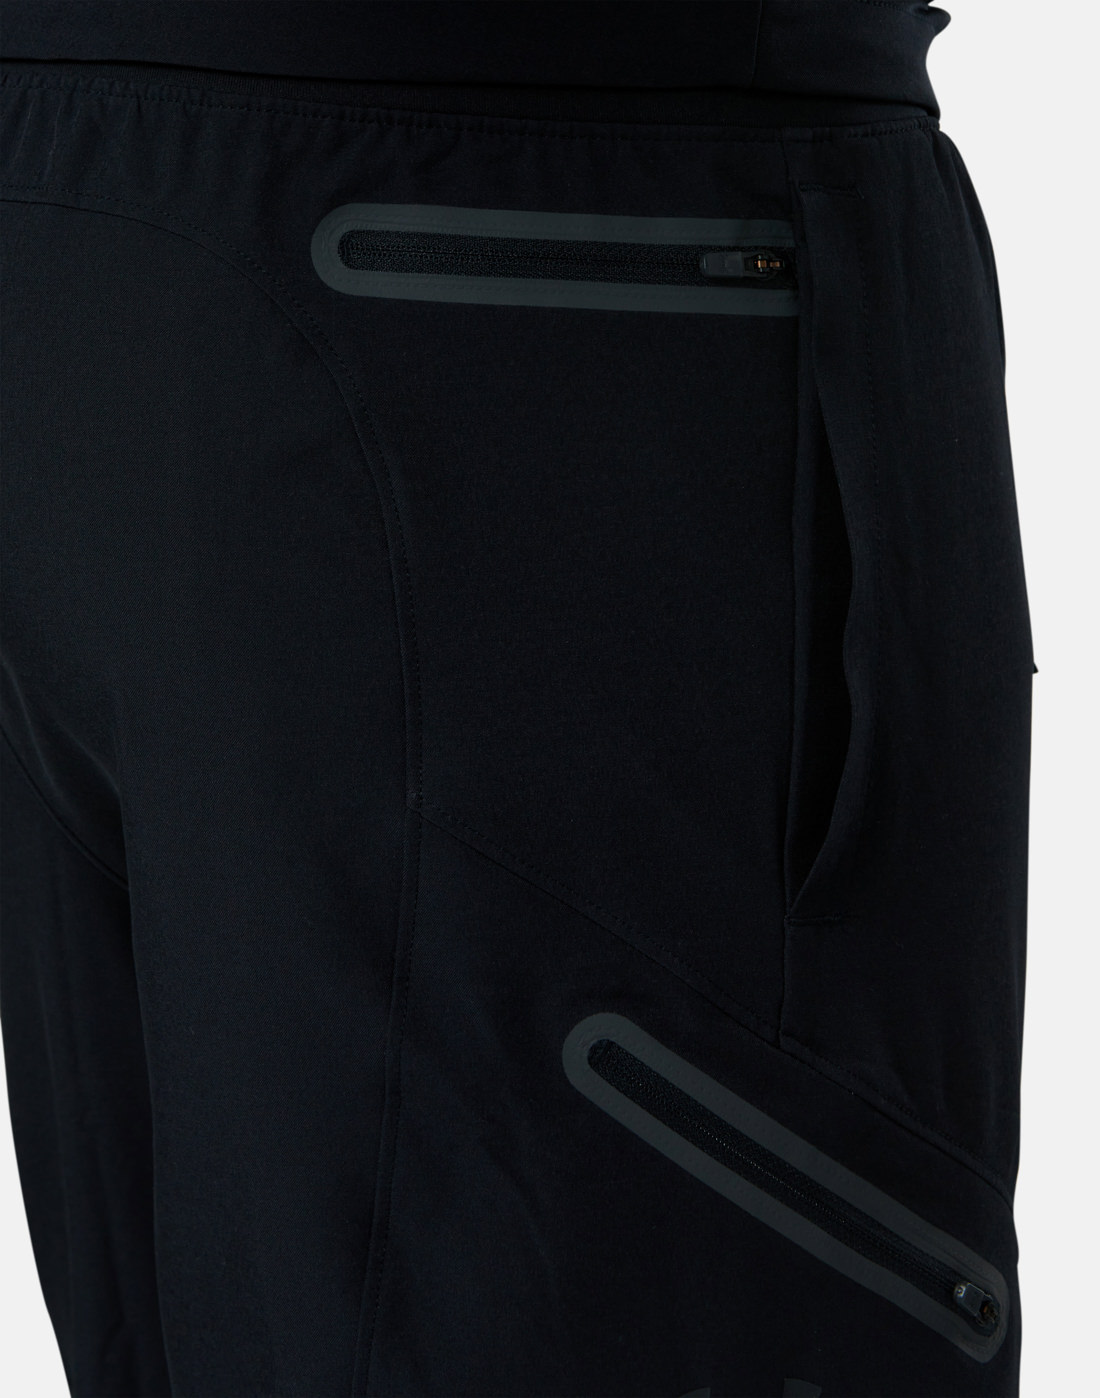 Under Armour Mens Unstoppable Cargo Pants - Black | Life Style Sports UK